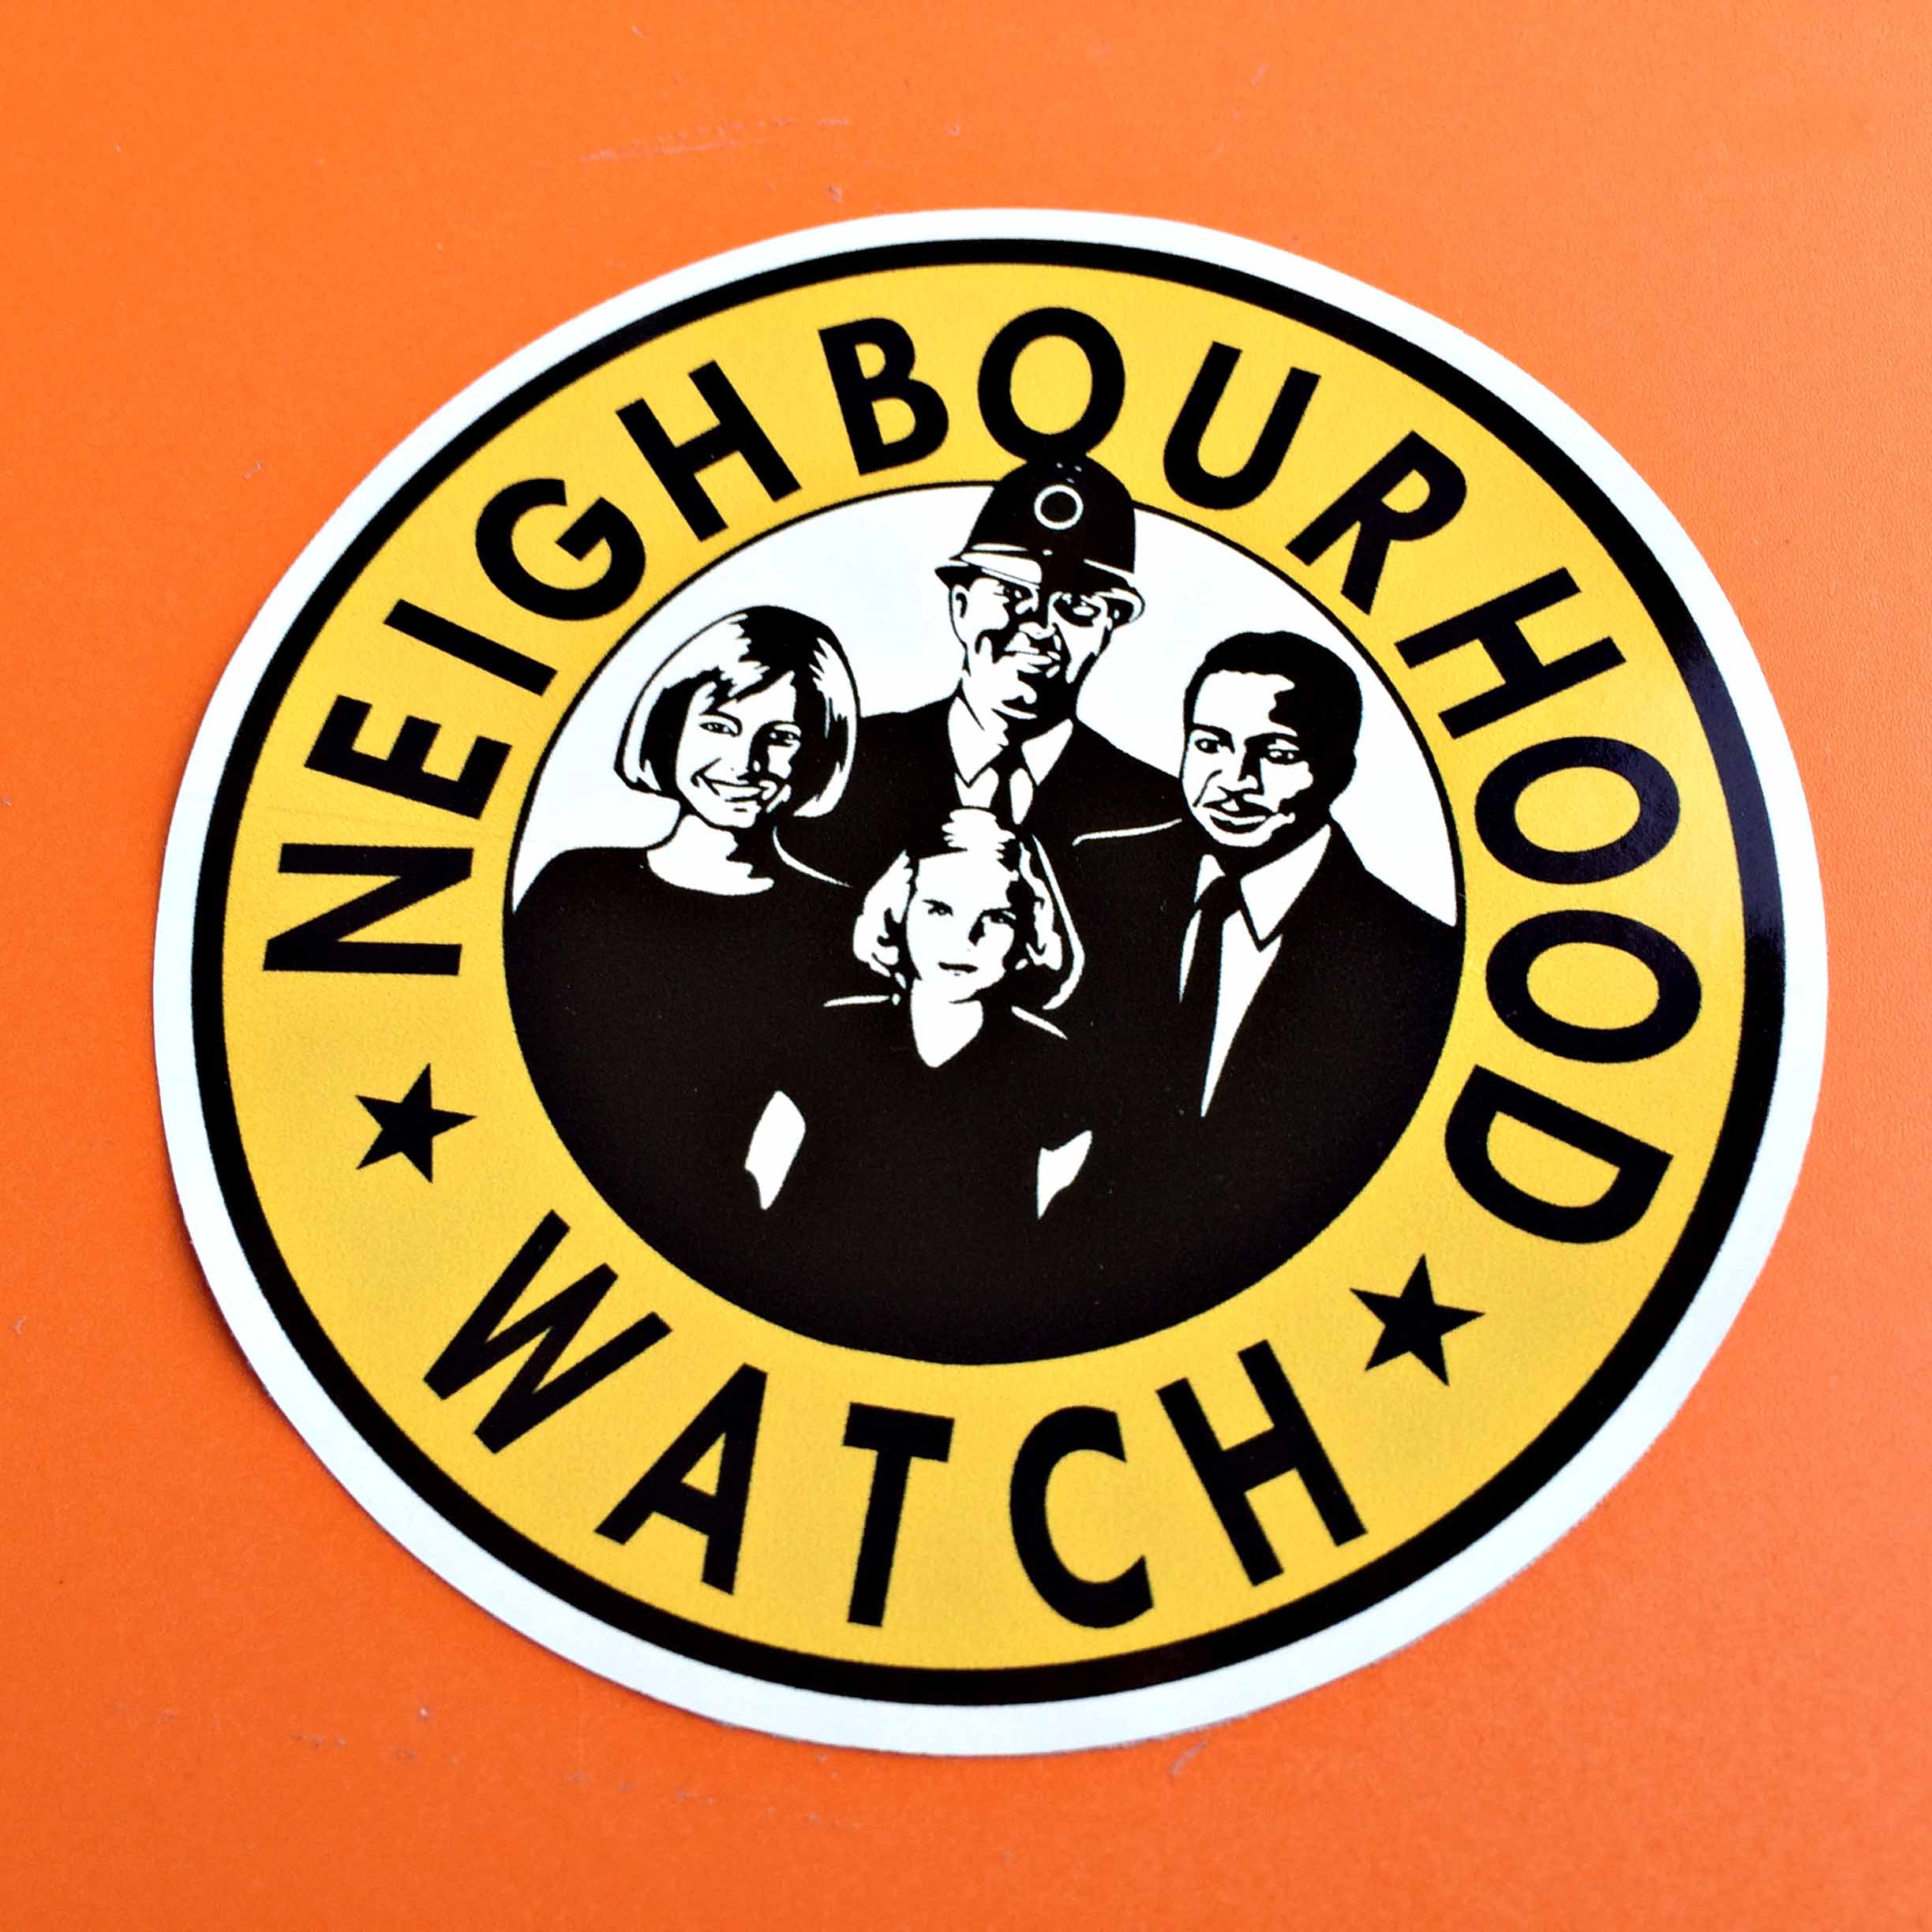 NEIGHBOURHOOD WATCH SECURITY STICKER. Neighbourhood Watch in black lettering around a yellow circle. Inner circle contains black and white figures of a man, woman, child and a policeman.